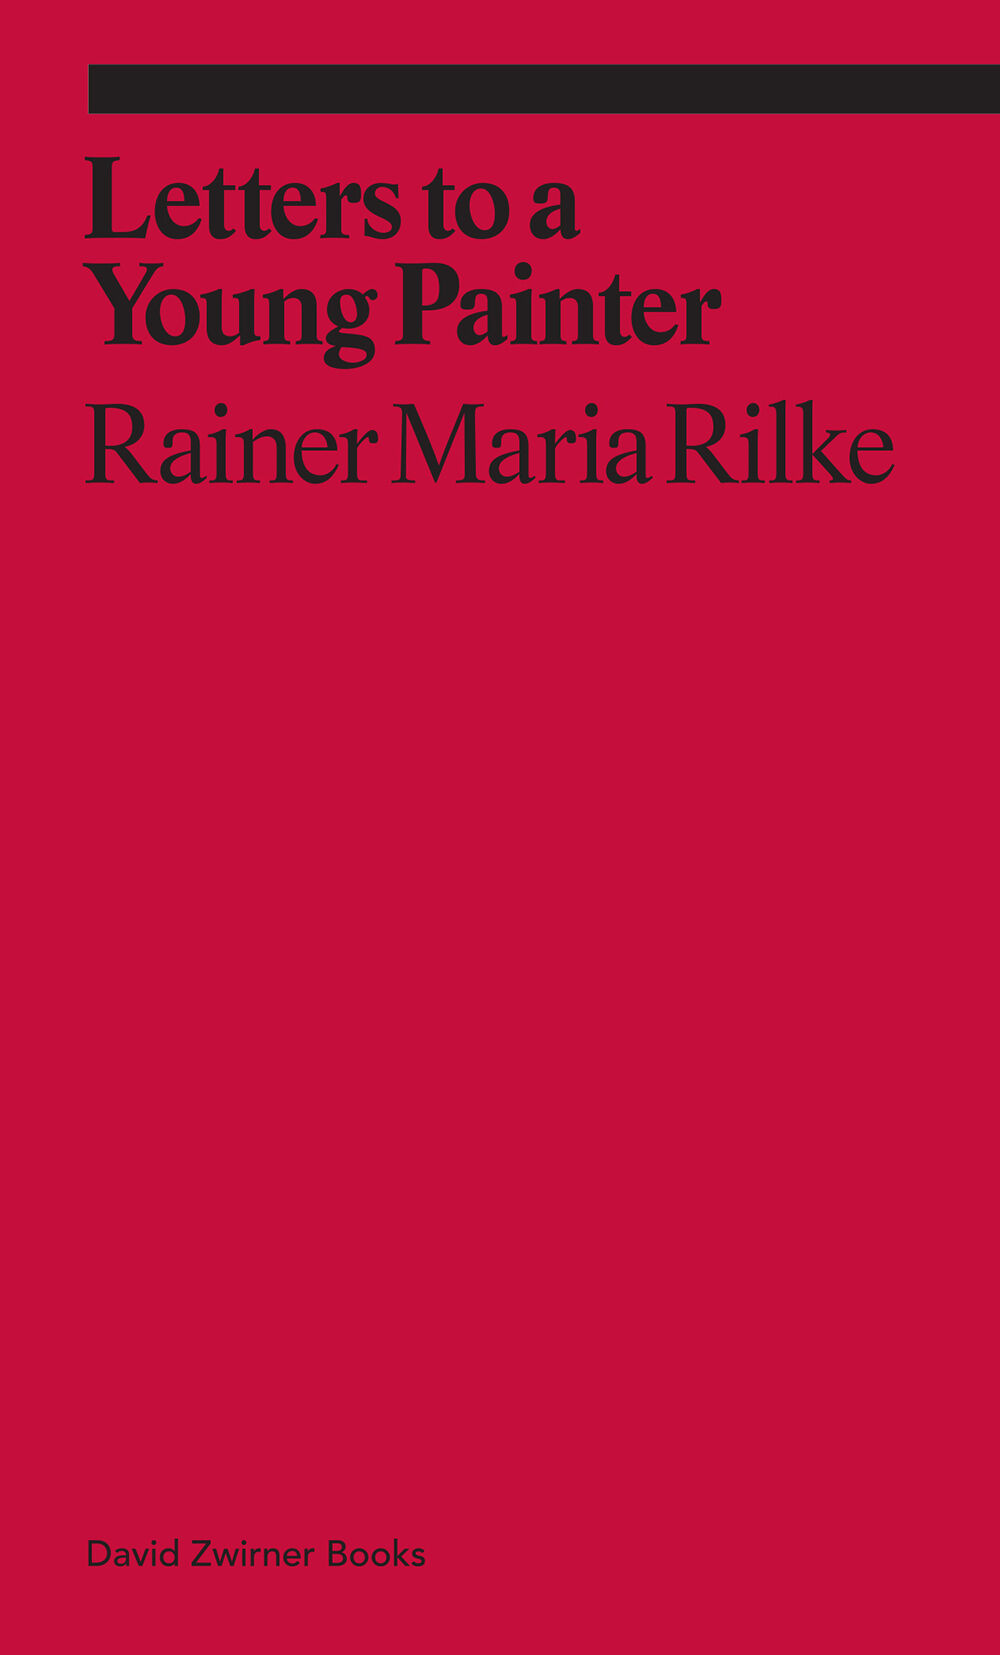 Cover of a book titled Letters to a Young Painter by Rainer Maria Rilke, published by David Zwirner Books in 2017.